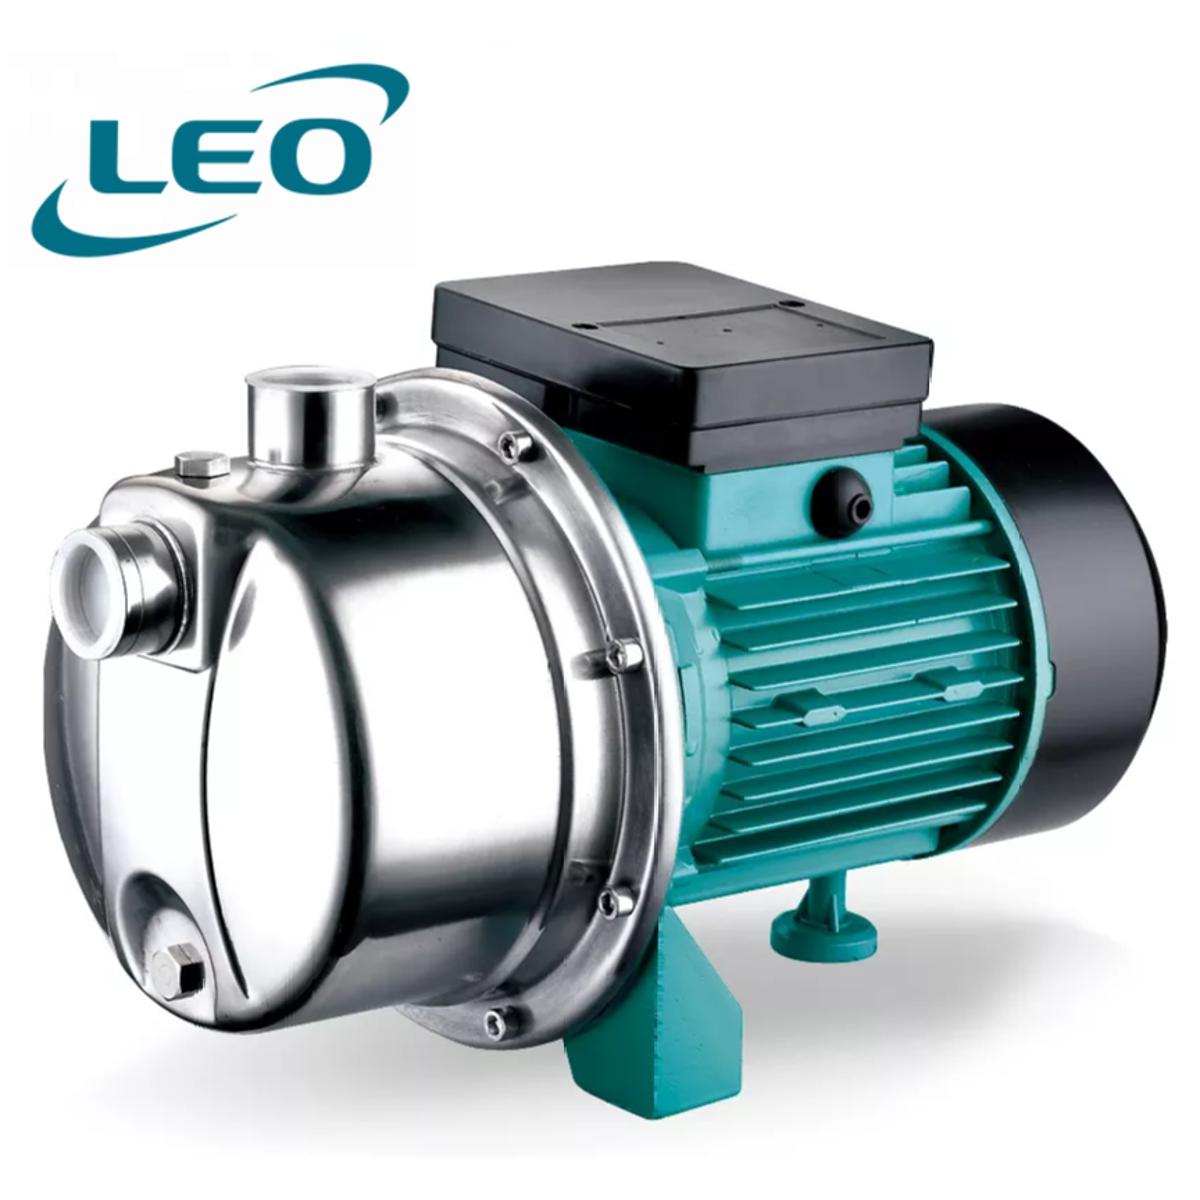 LEO - 4XCM-120C - 750W - 1.0 HP -  Stainless Steel Multistage Centrifugal Pump- 180V~220V SINGLE PHASE- SIZE:- 1" X 1"- European STANDARD